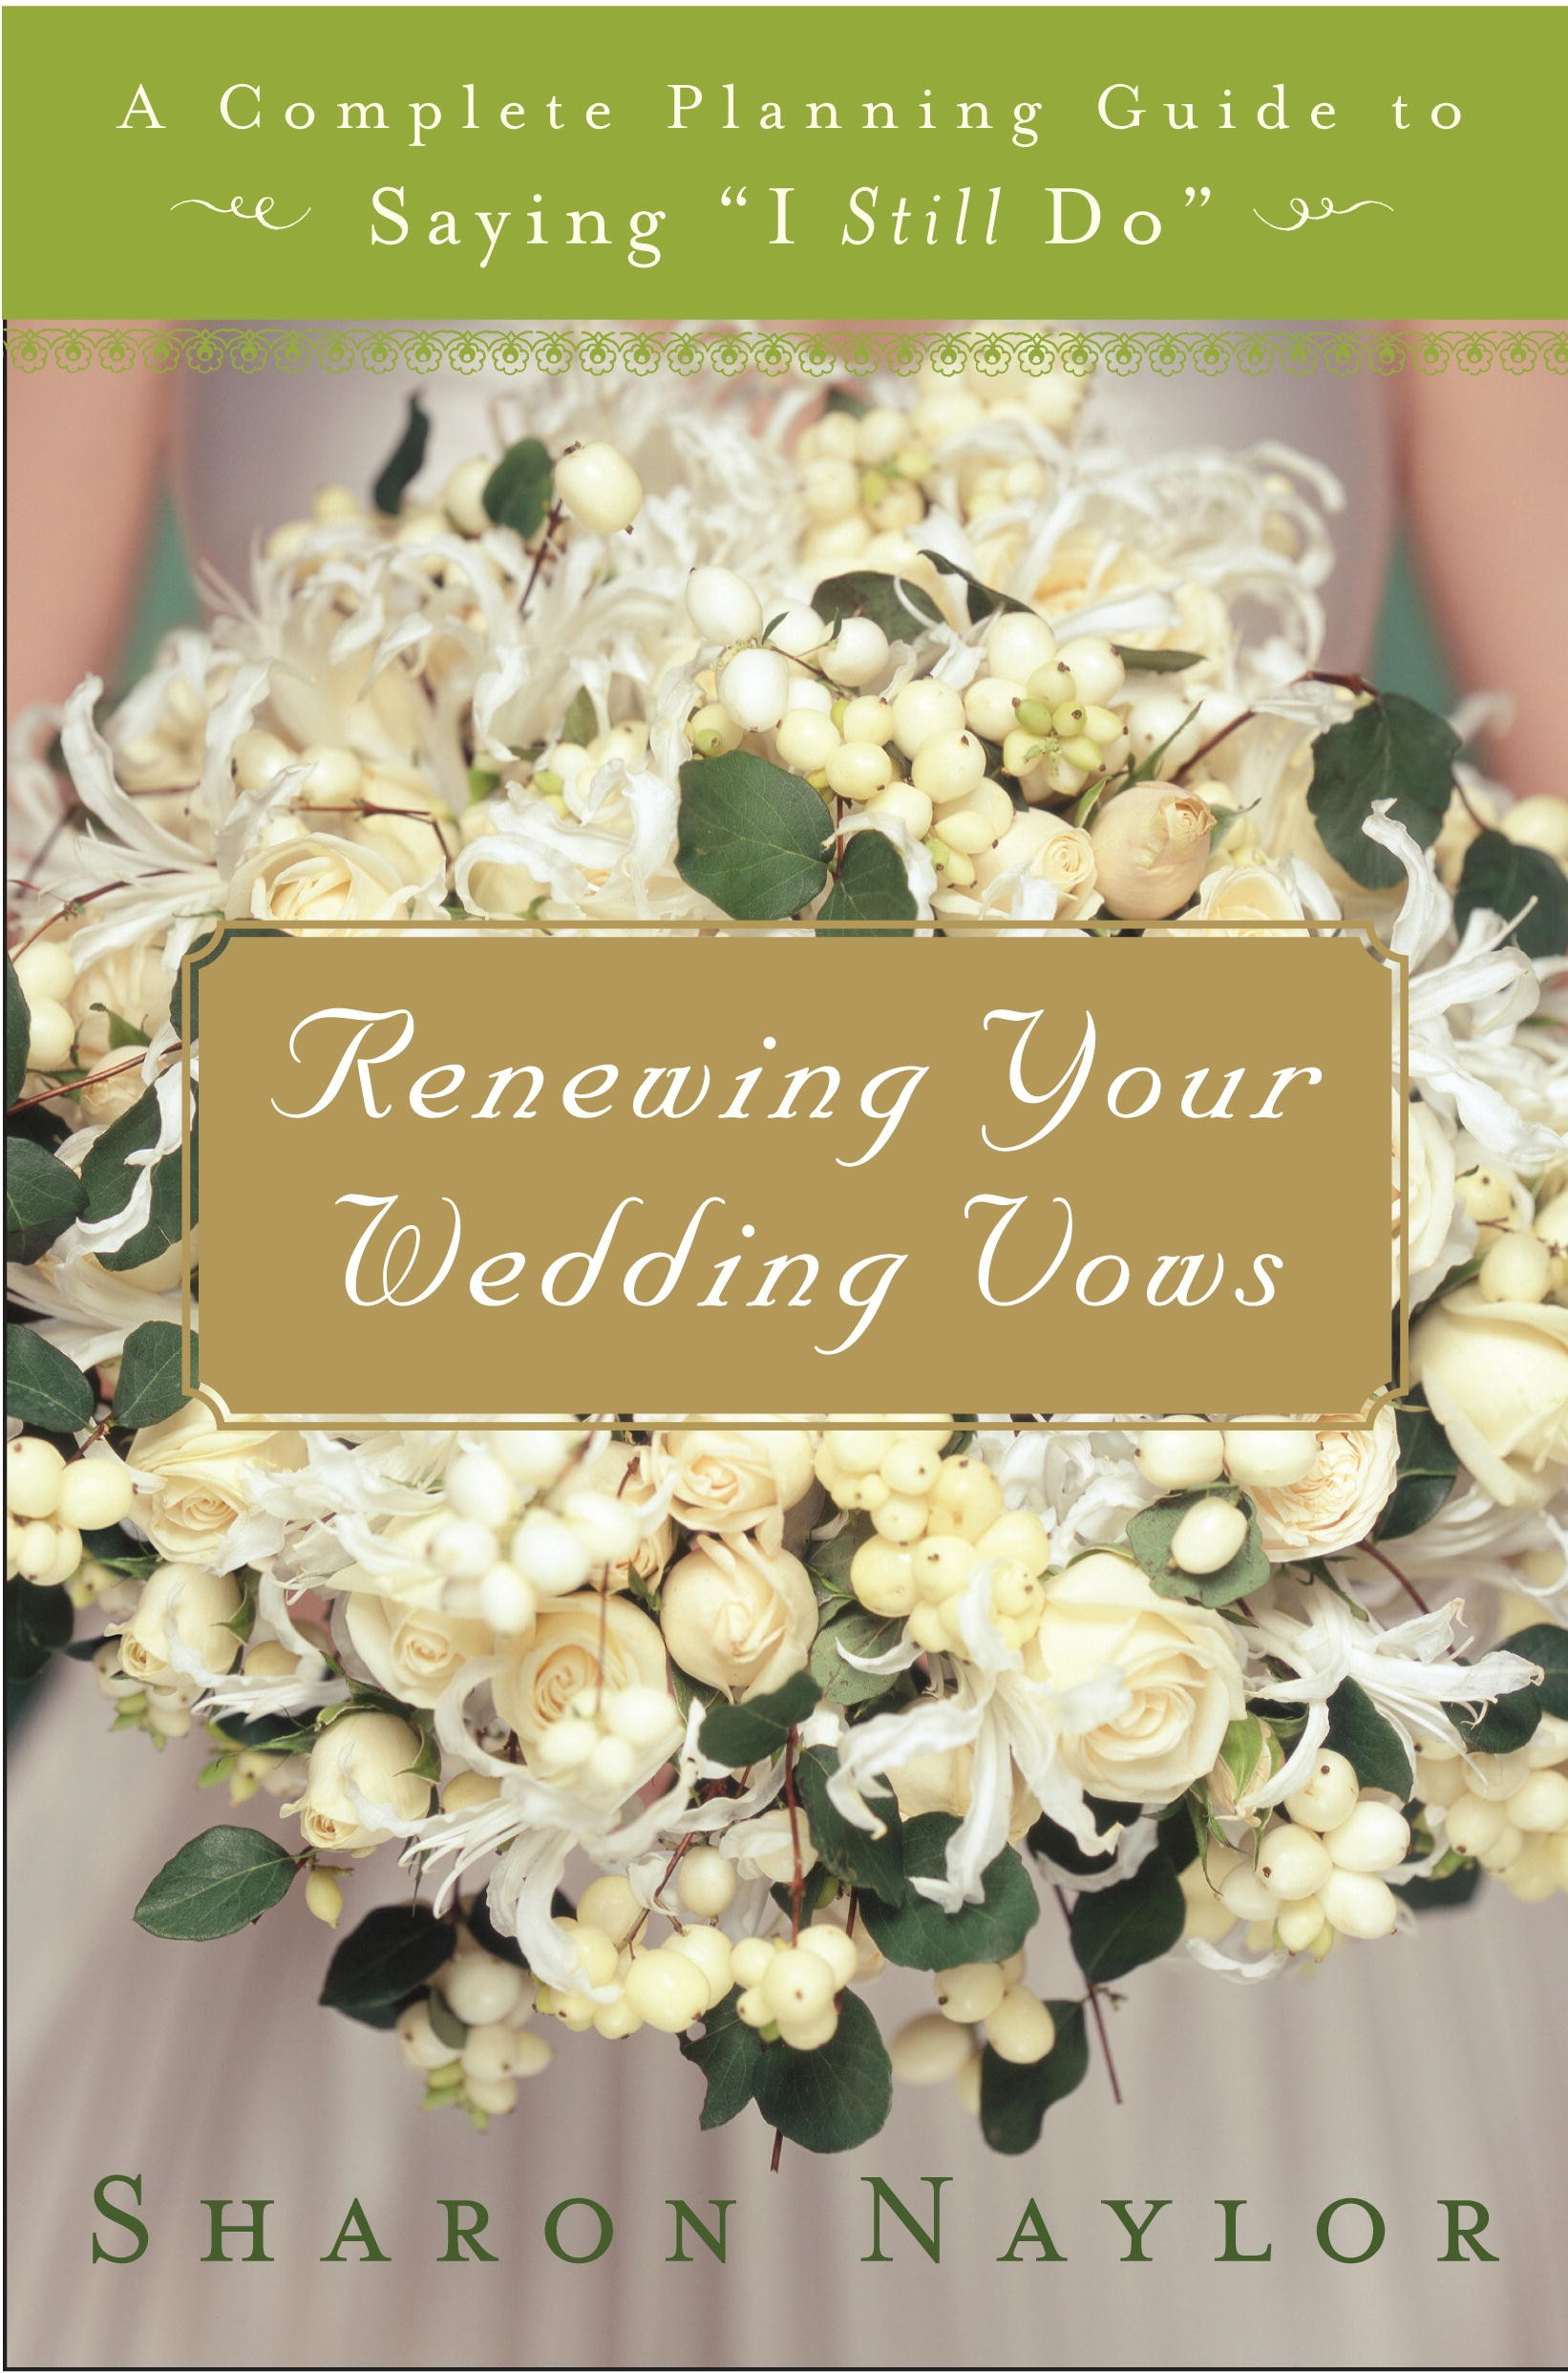 Renew Wedding Vows Ideas
 Renewing Wedding Vows With Sample Vows For A Vow Renewal